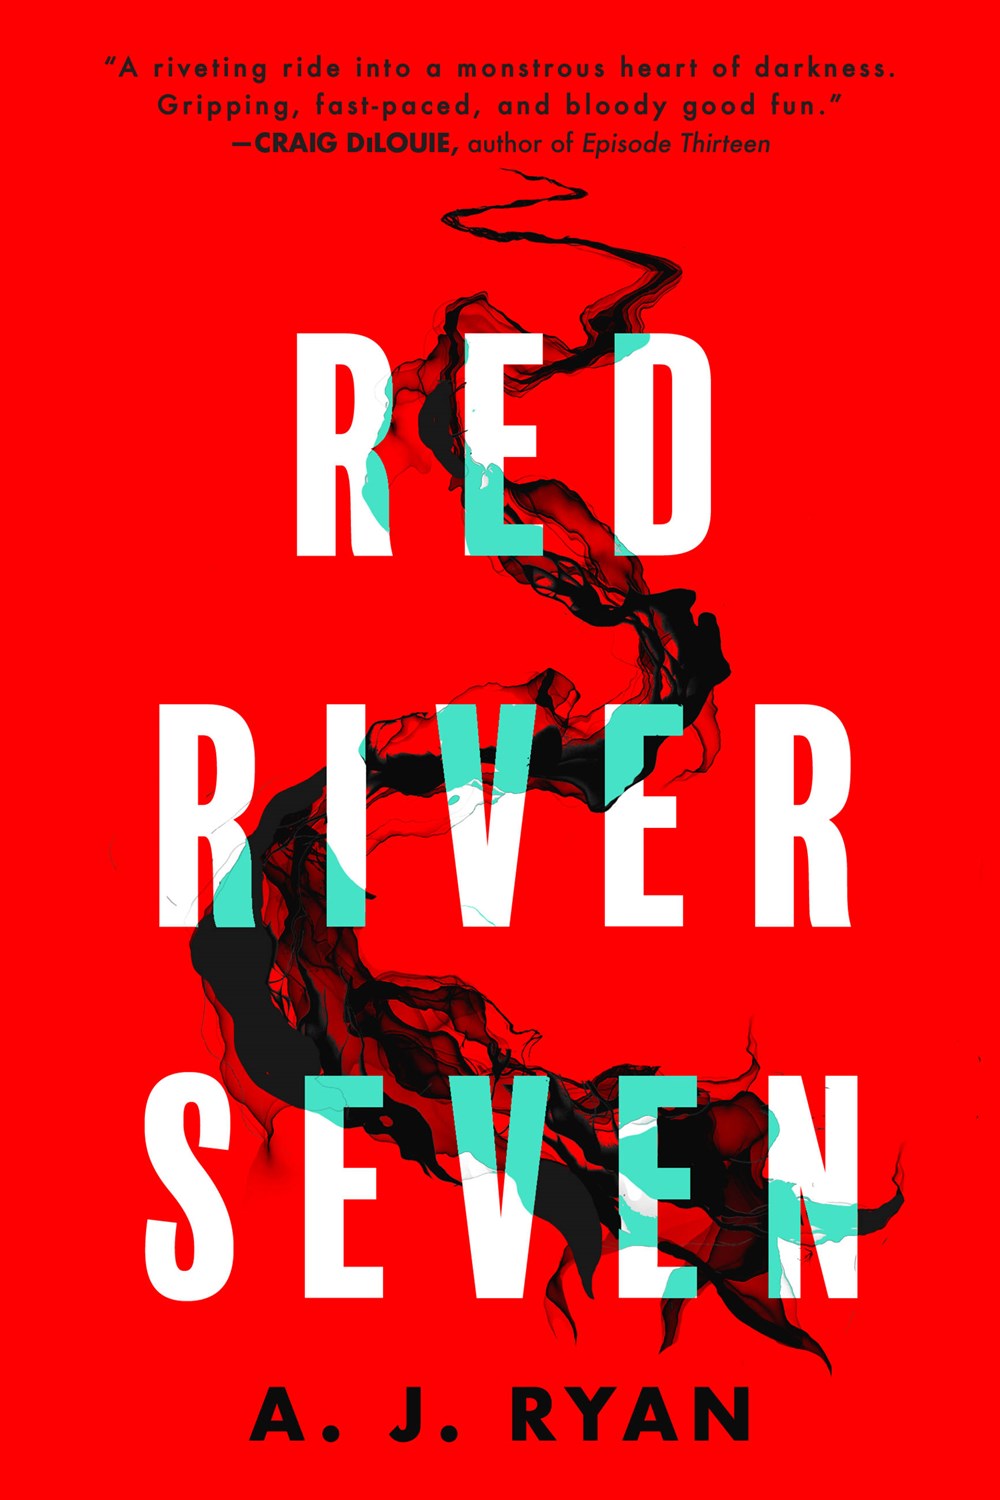 Red River Seven by A. J. Ryan